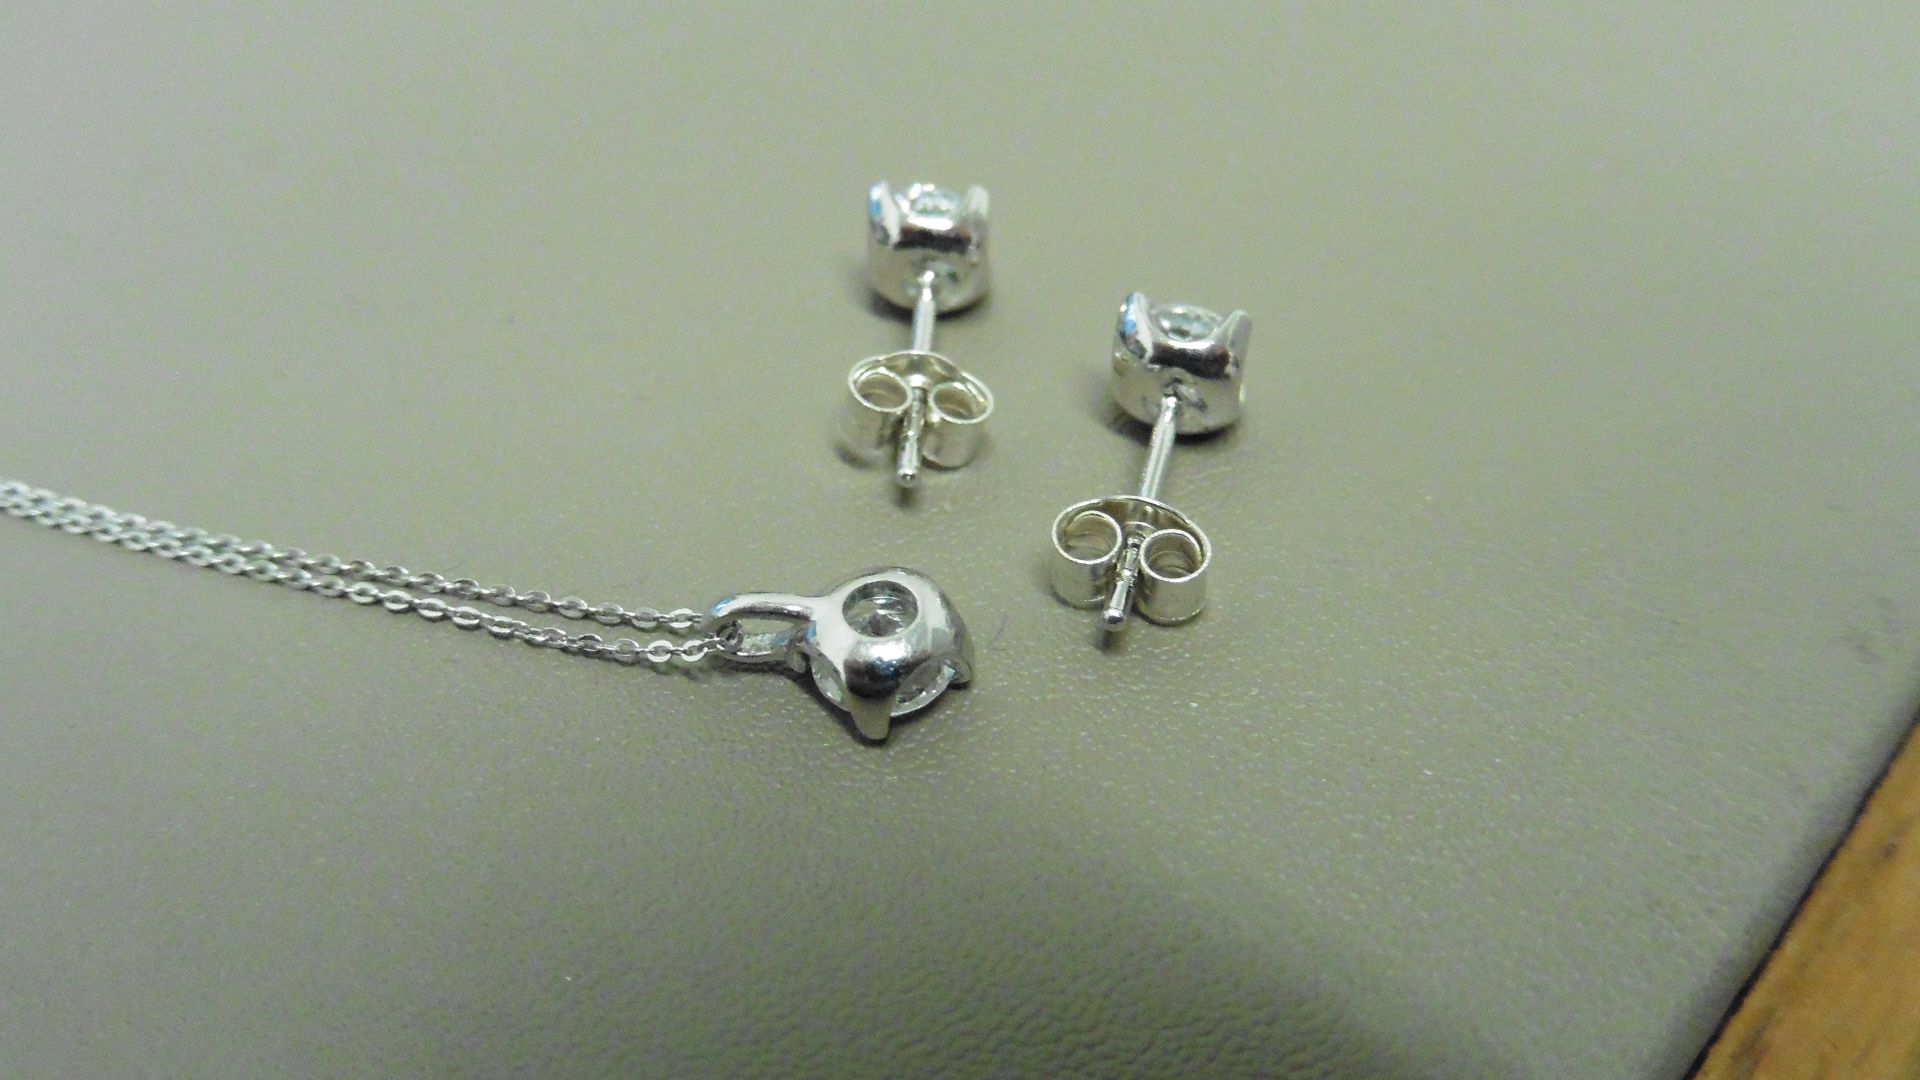 0.25Ct / 0.50Ct Diamond Pendant And Earring Set In Platinum - Image 2 of 2